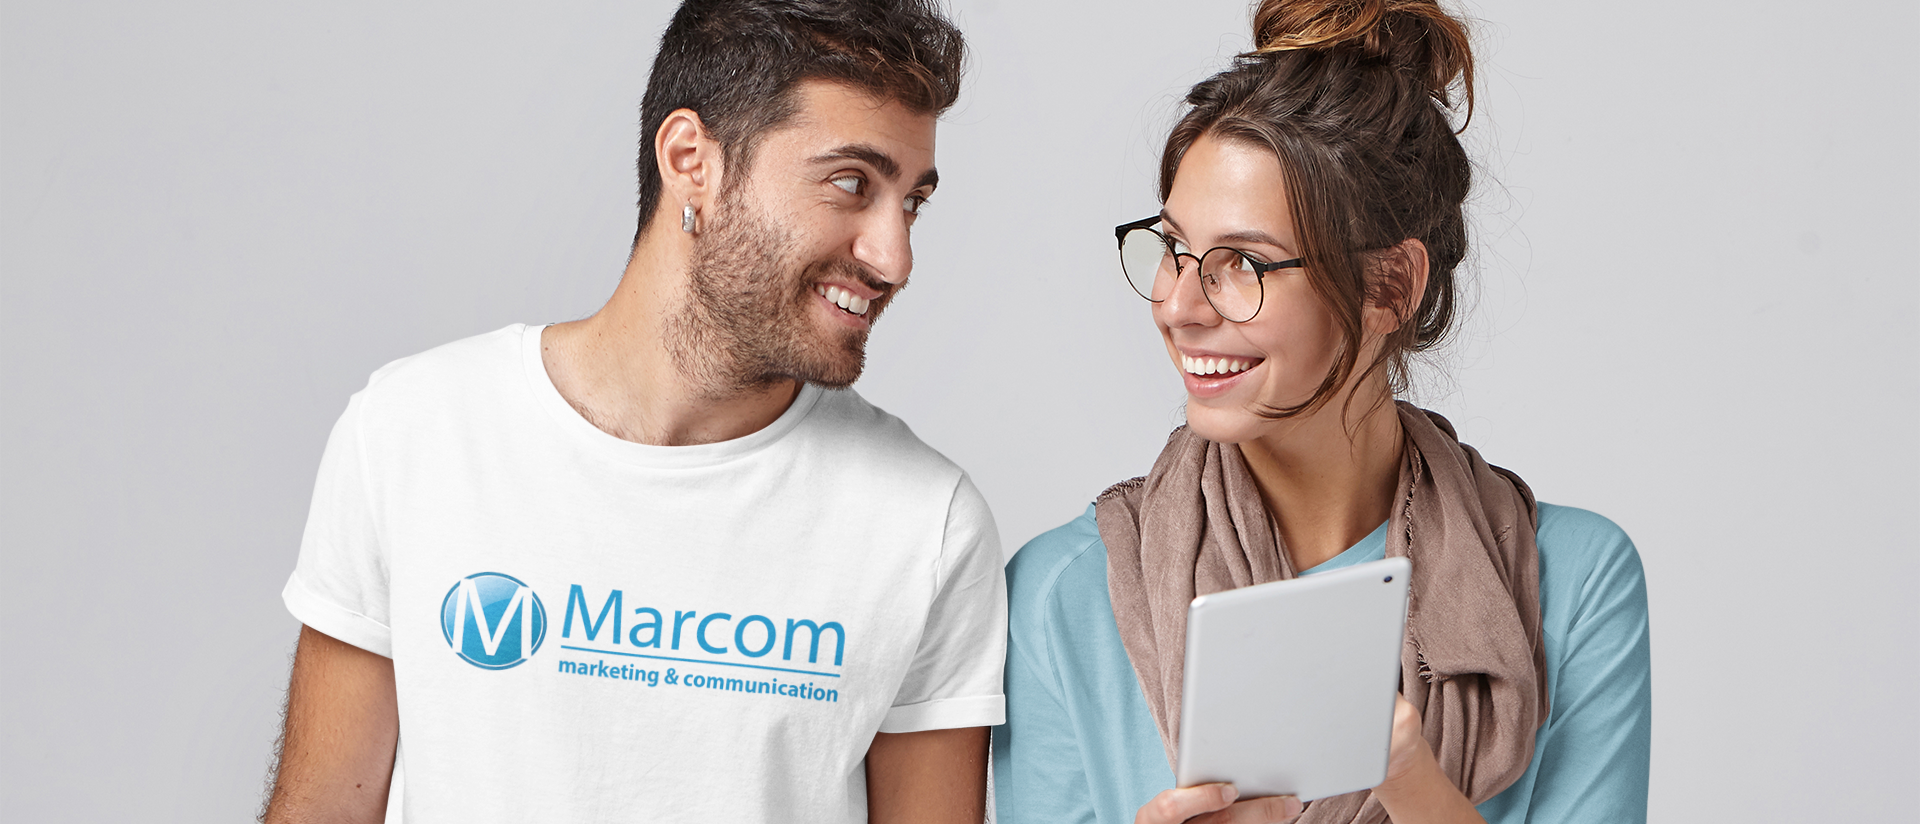 MarCom Agency Insights: Enhancing Your Brand's Communication